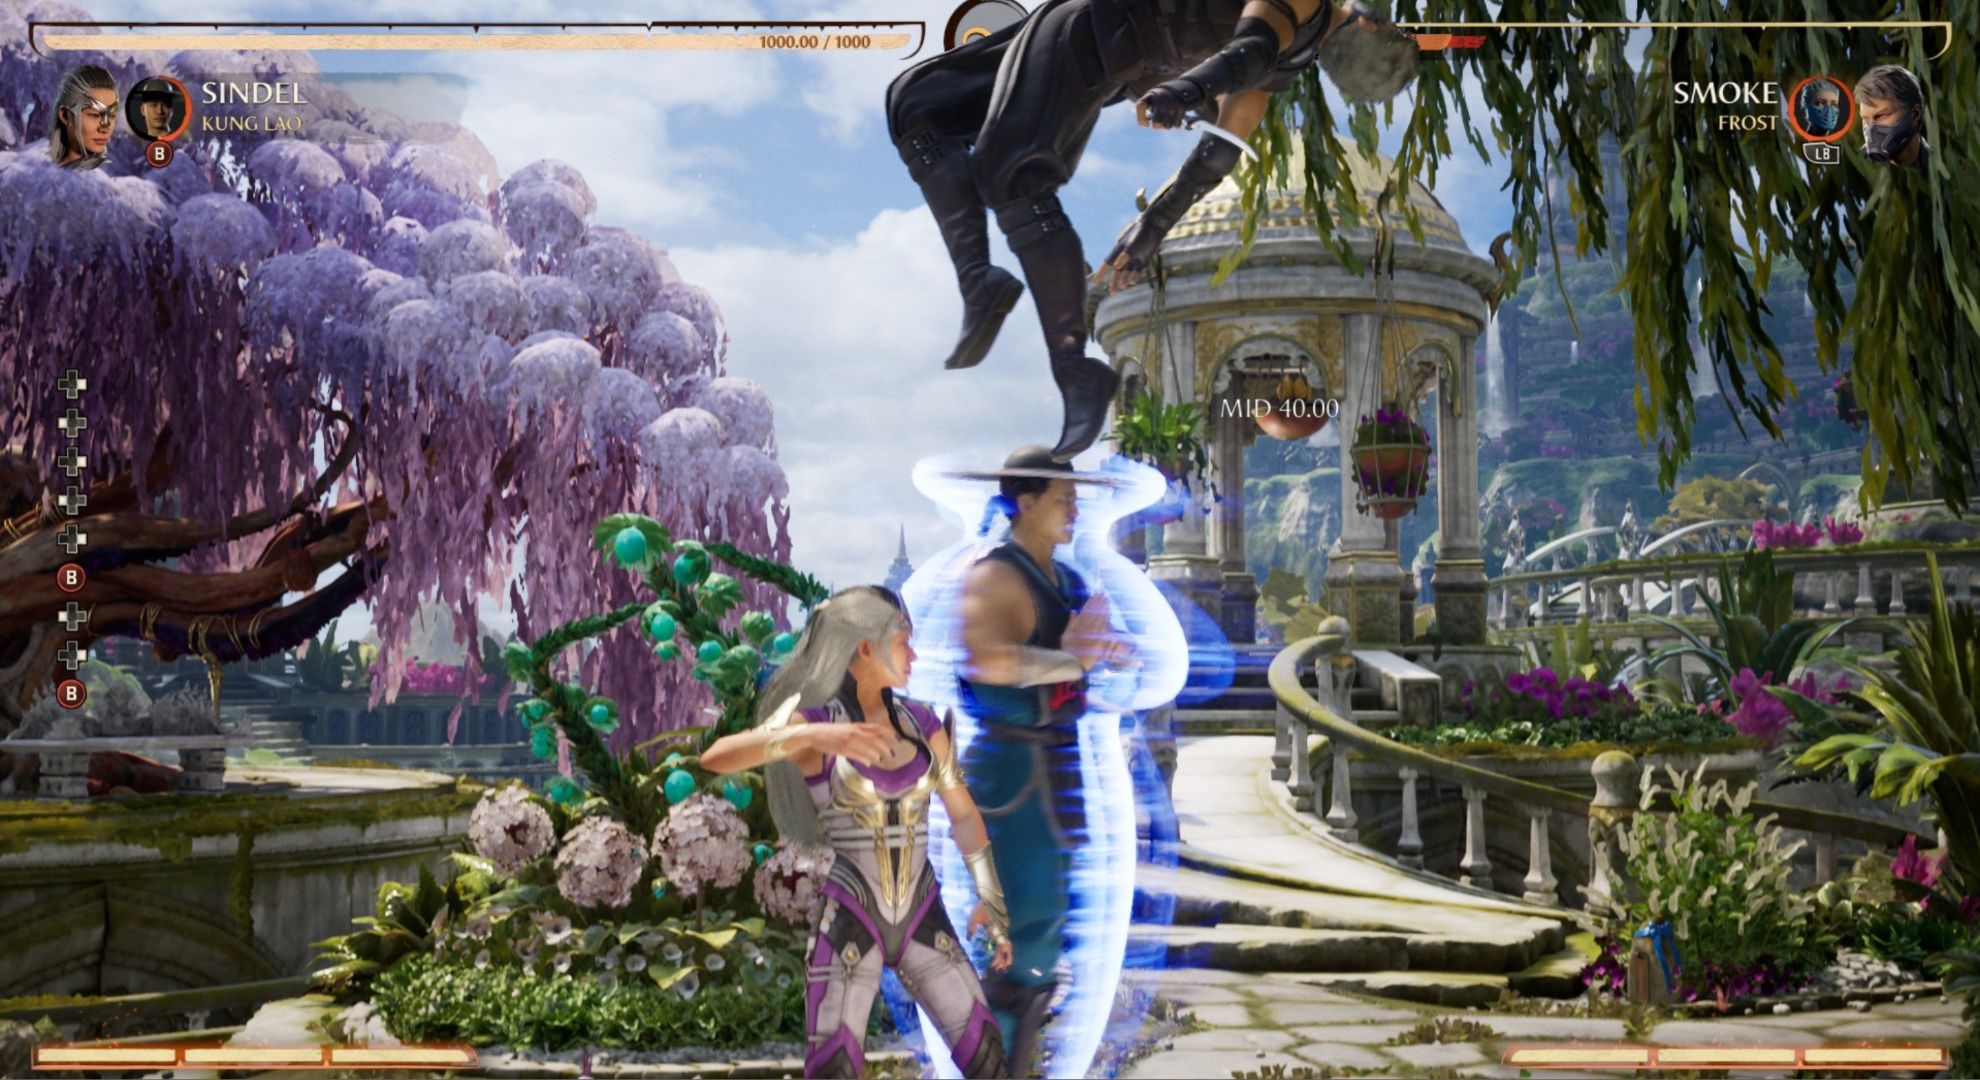 Kung Lao performing his spin Kameo attack against Smoke with Sindel preparing to follow up in Mortal Kombat 1.